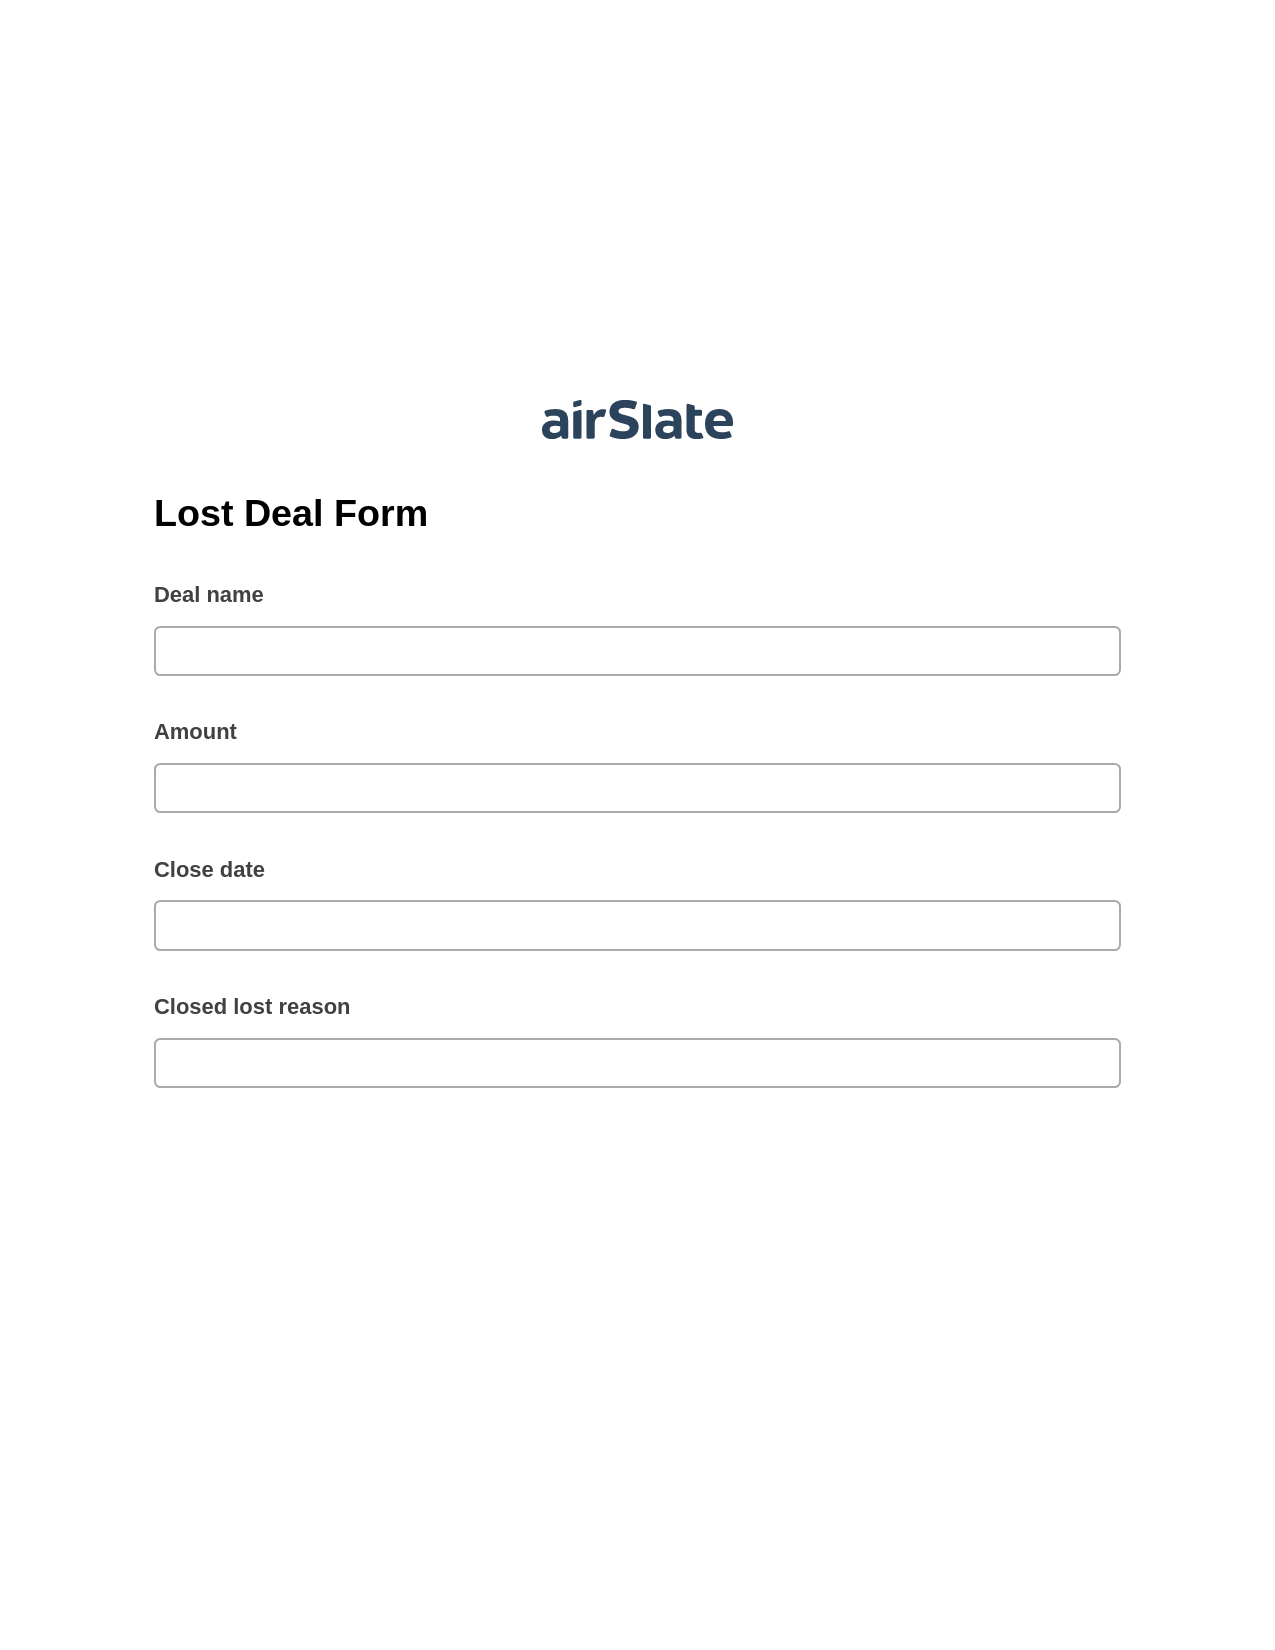 Lost Deal Form Pre-fill from MS Dynamics 365 Records, Hide Signatures Bot, Archive to Google Drive Bot